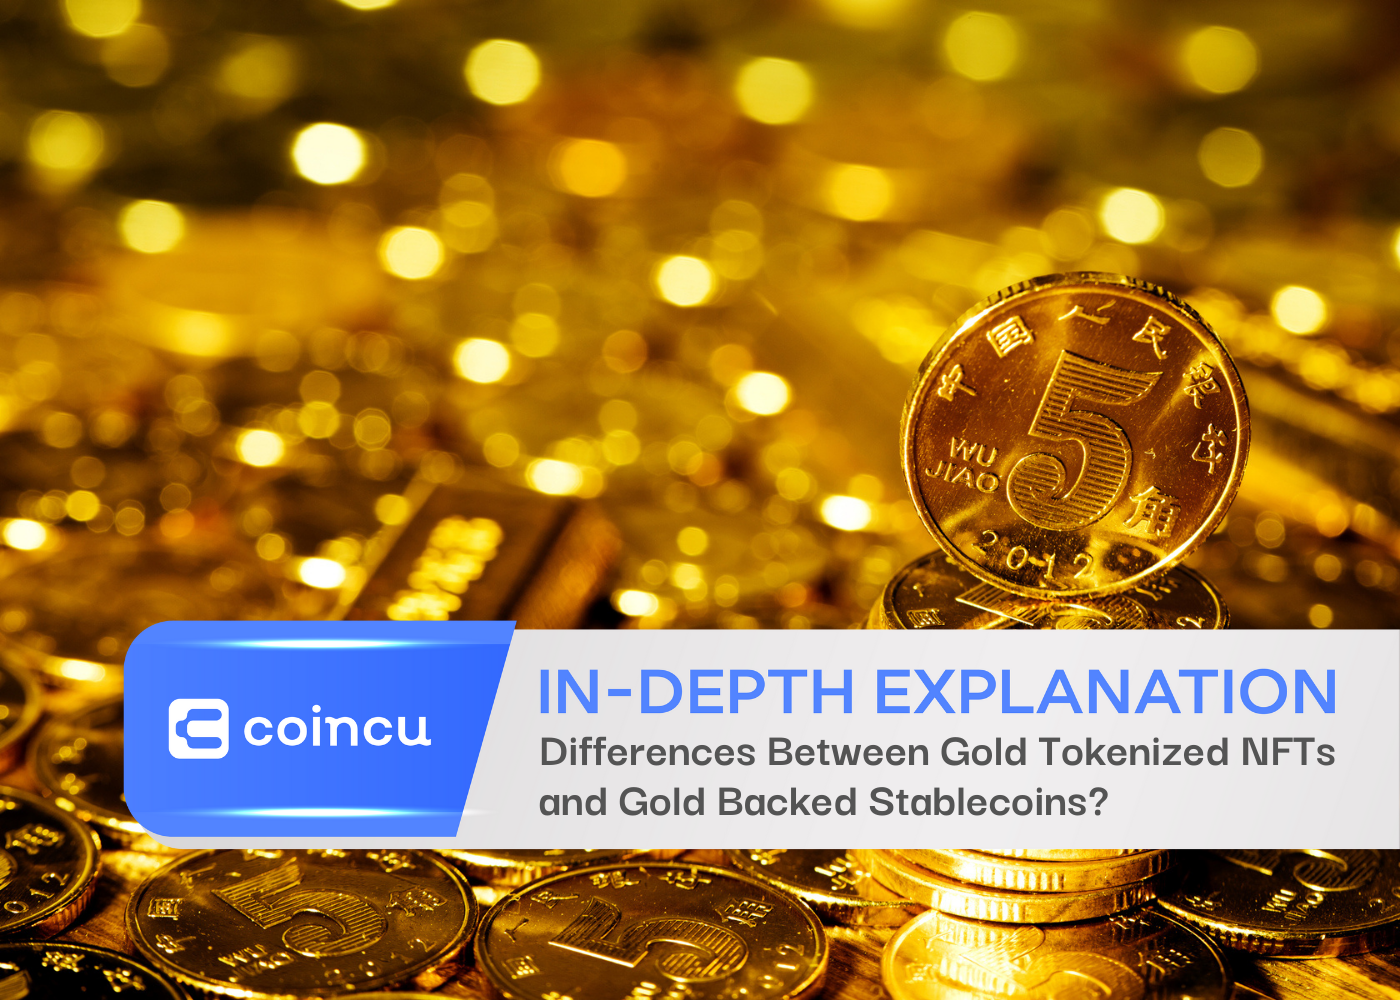 Differences Between Gold Tokenized NFTs